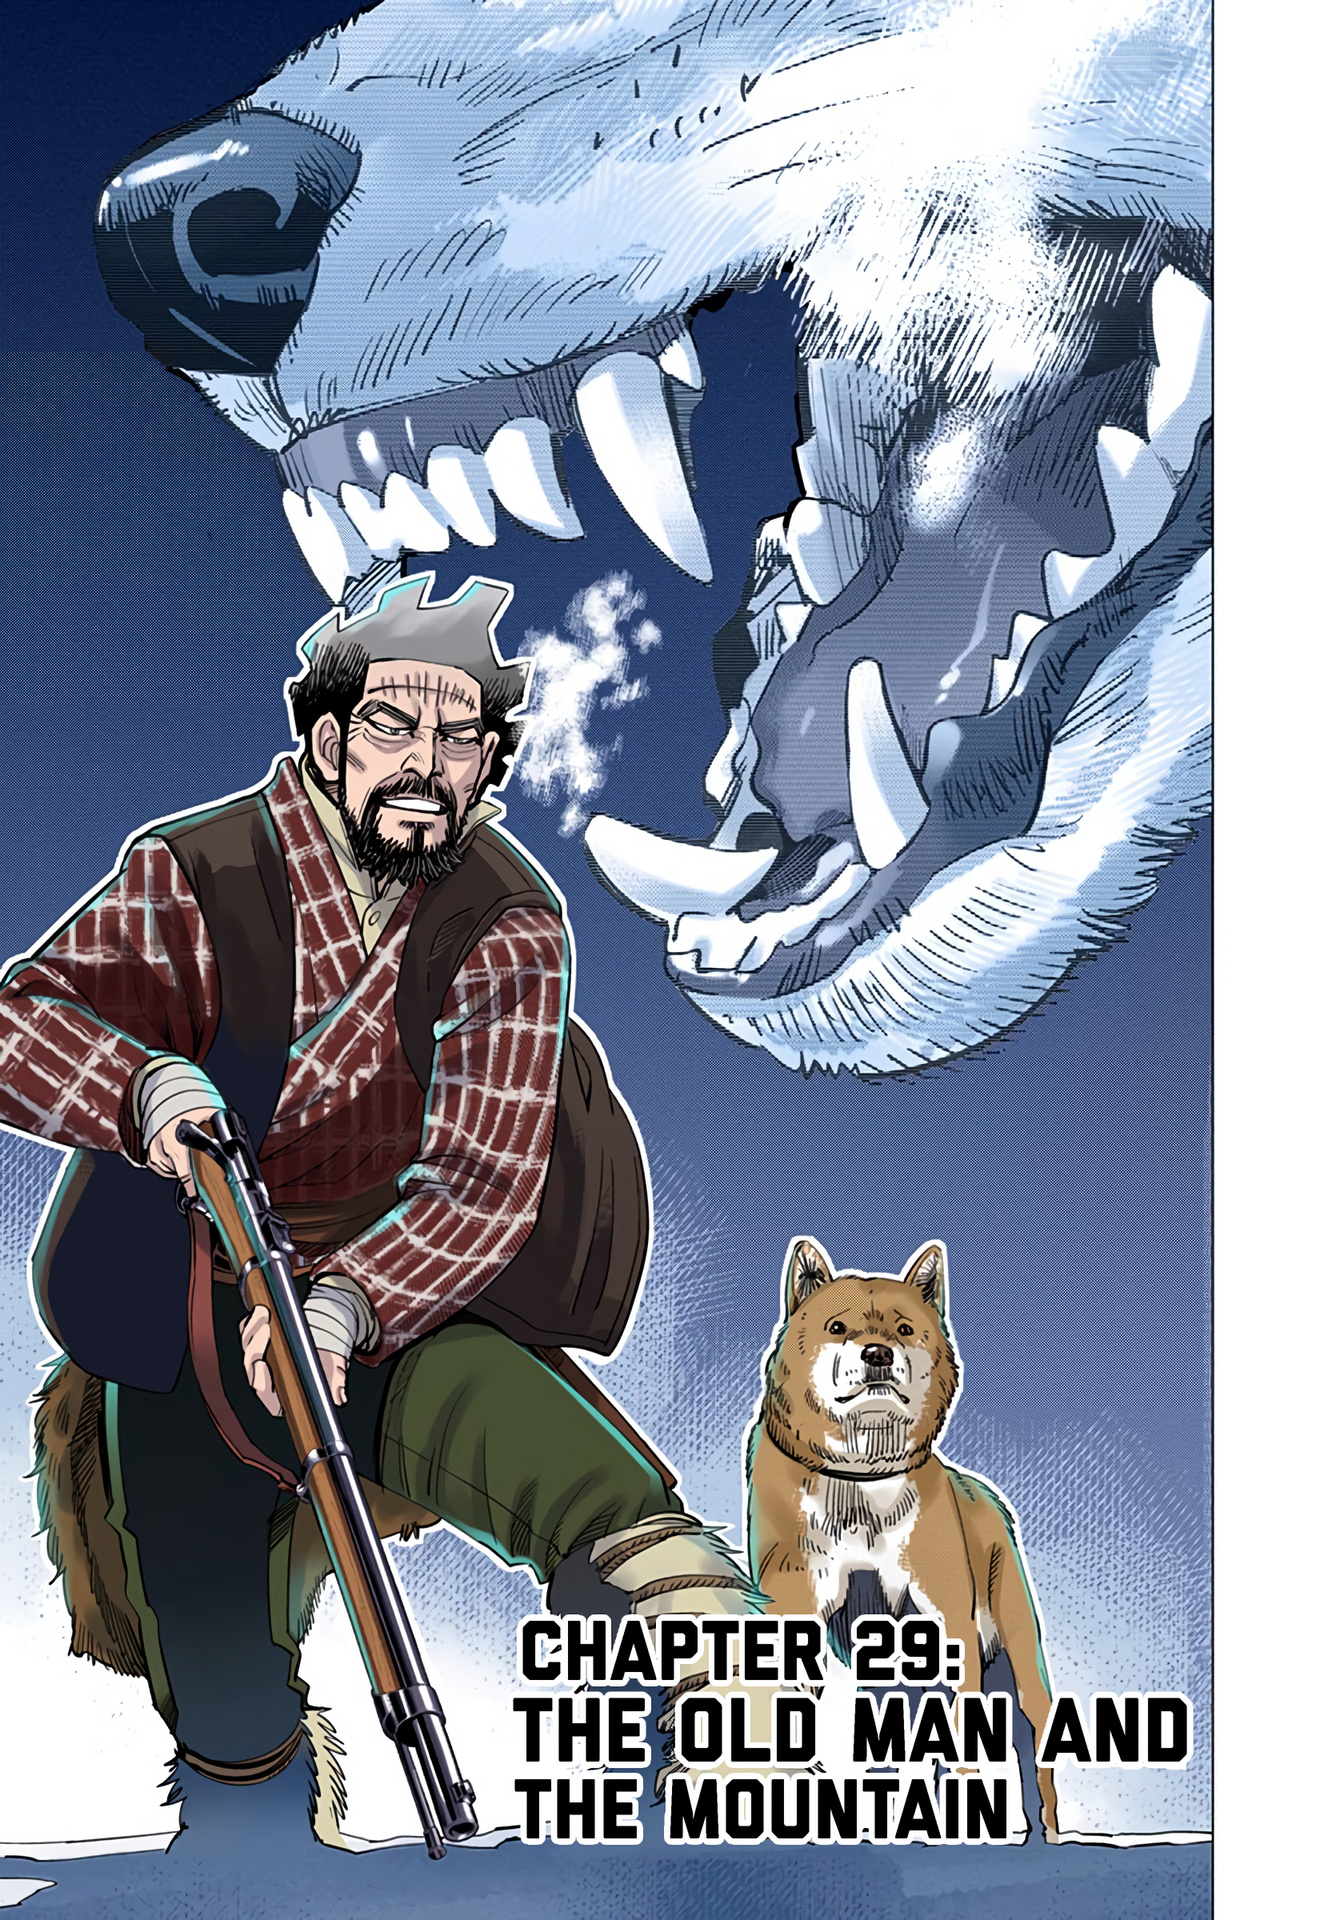 Golden Kamuy - Digital Colored Comics Vol.4 Chapter 29: The Old Man And The Mountain - Picture 1